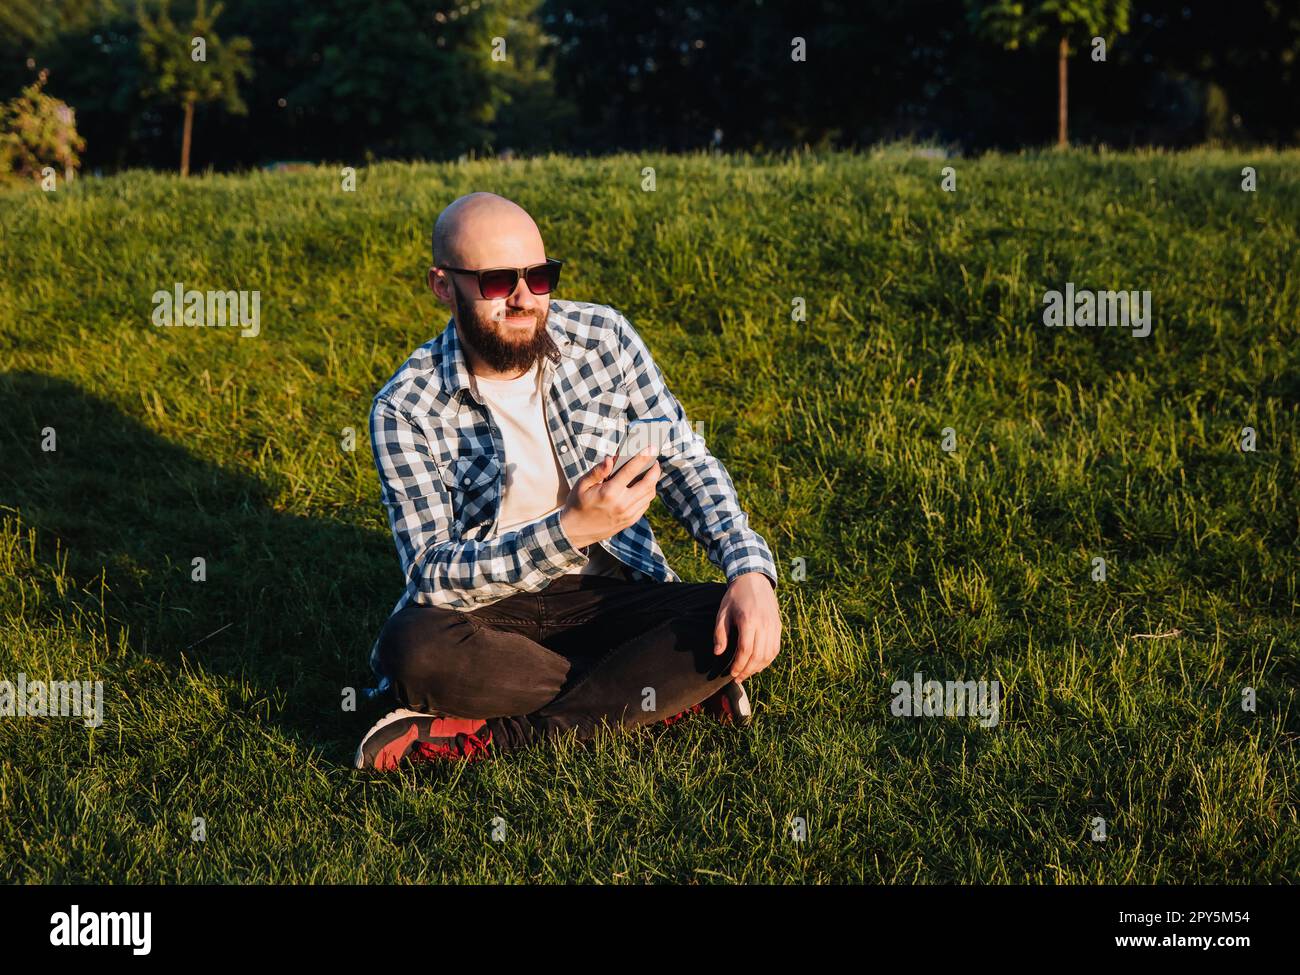 A young man sits on the green grass in the park and uses social networks using a mobile phone. Stock Photo